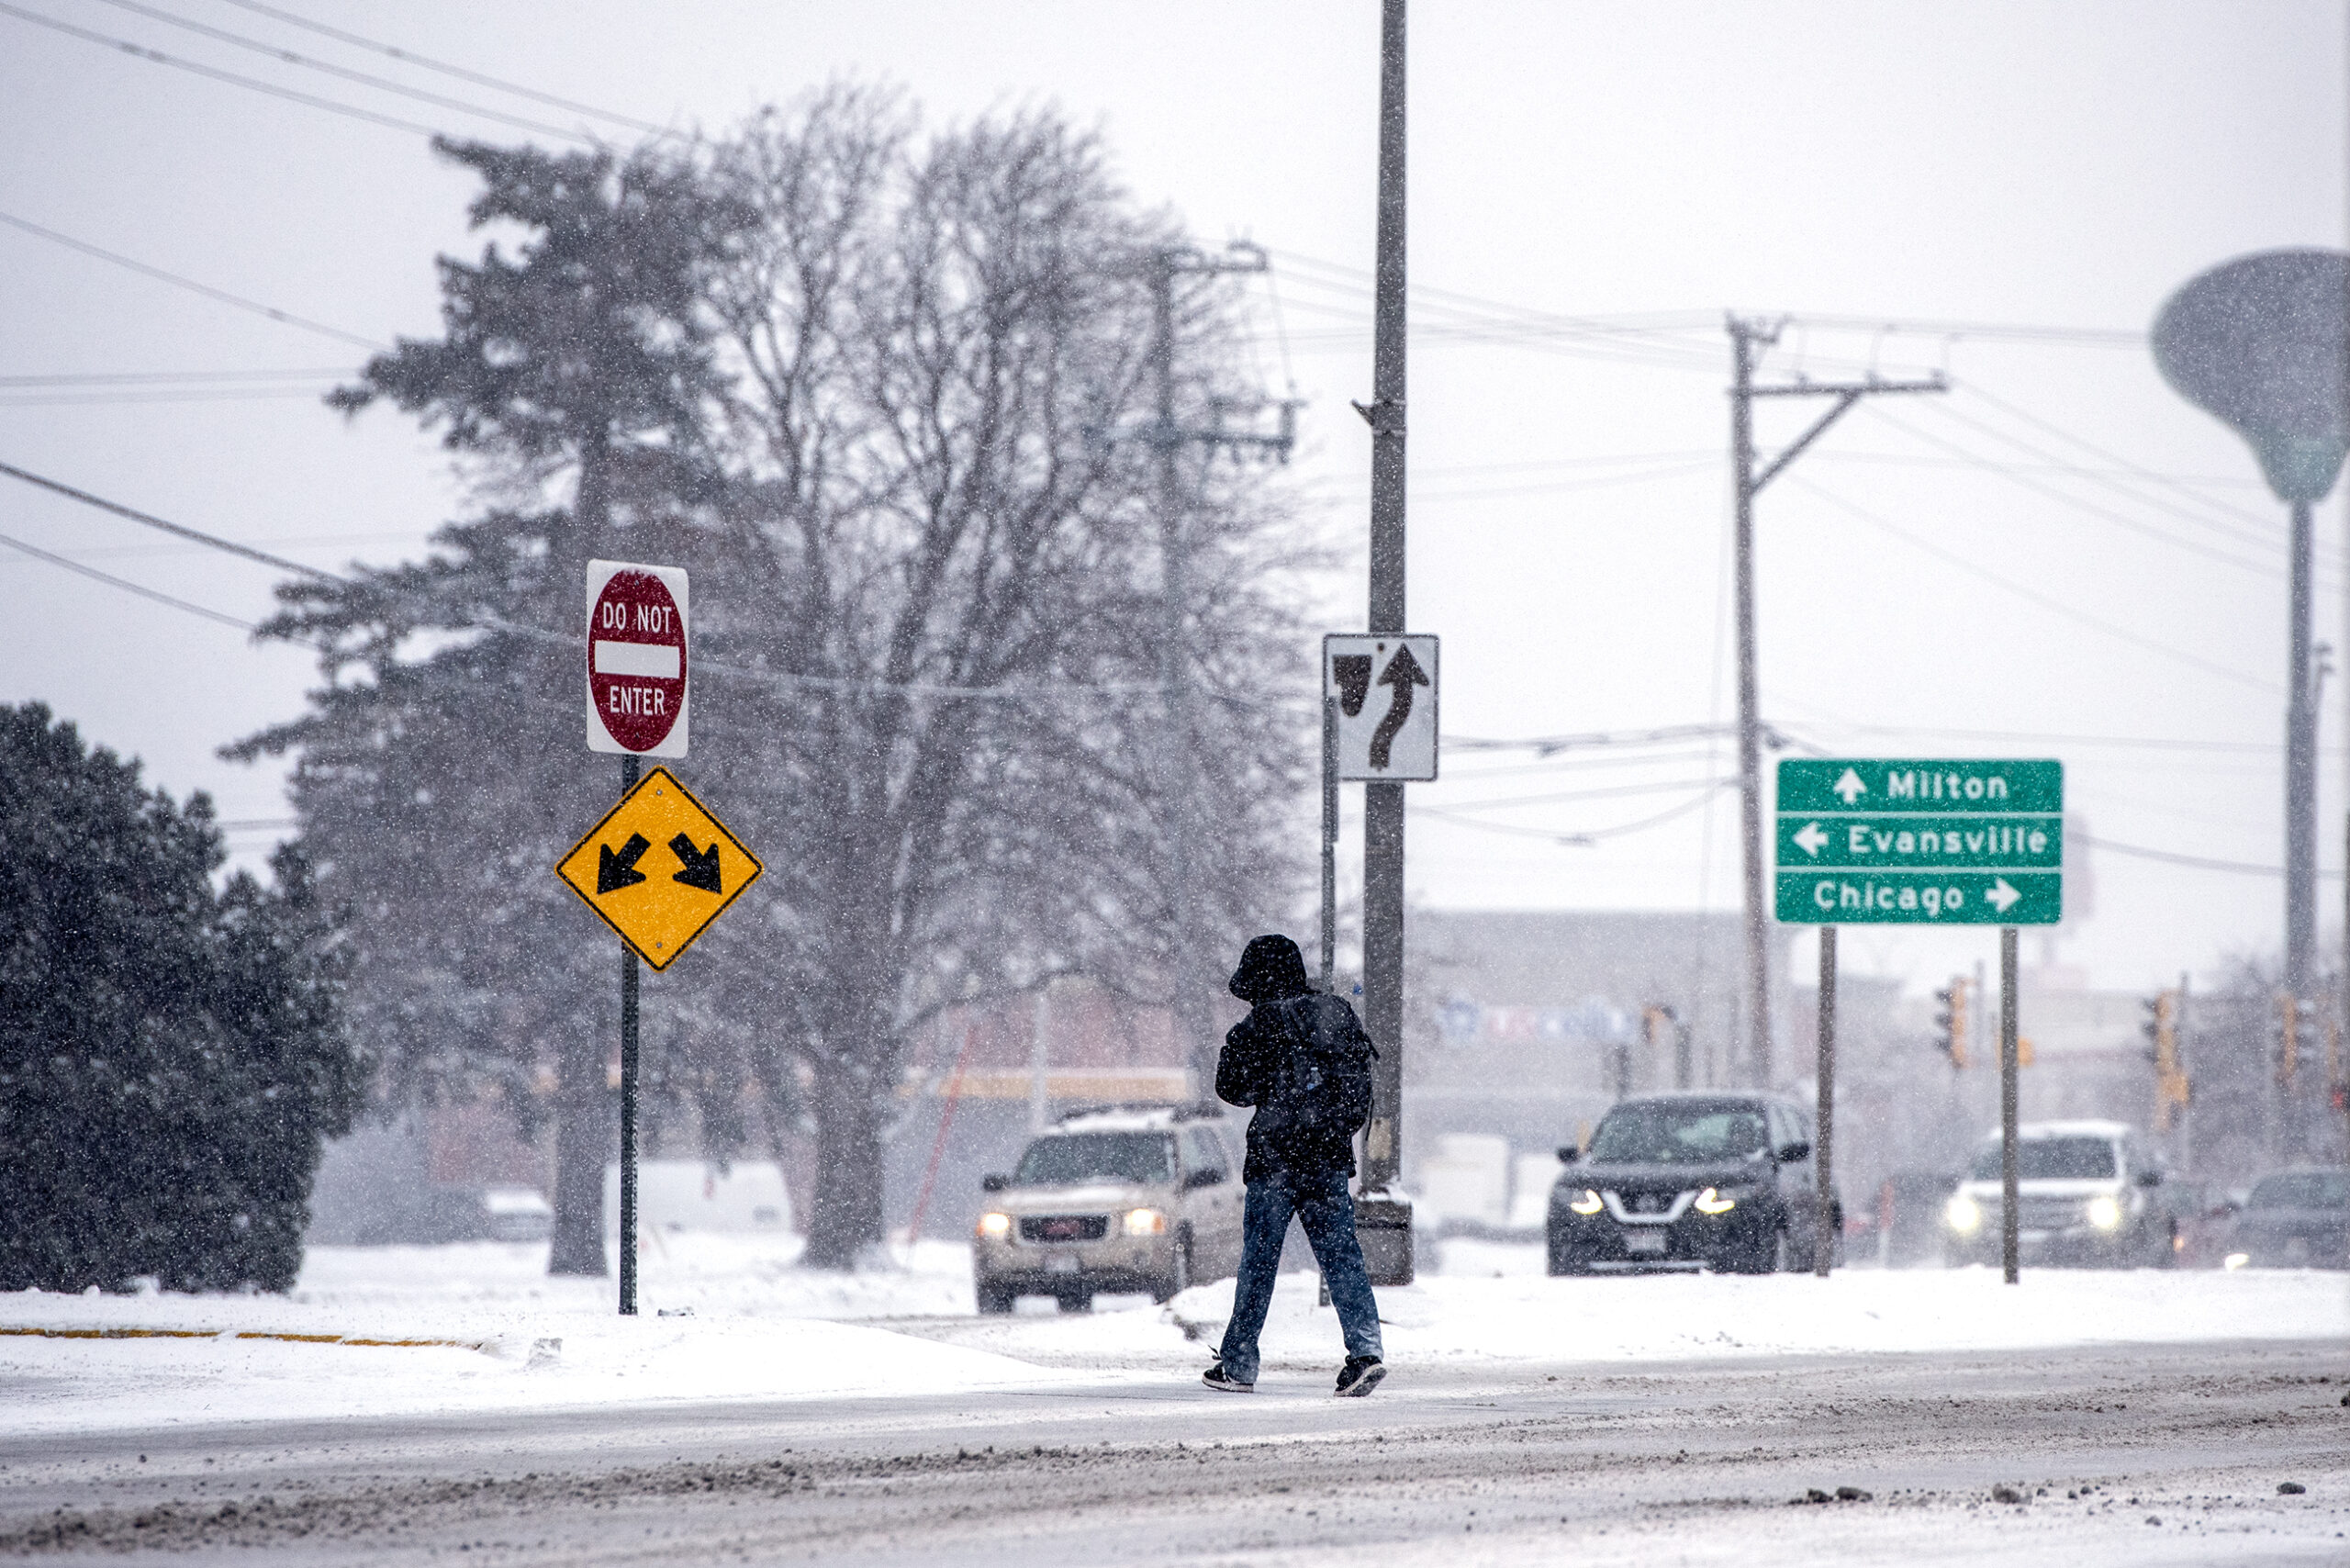 A pedestrian in a black coat and hood approaches the middle of a divided highway in a snow storm.